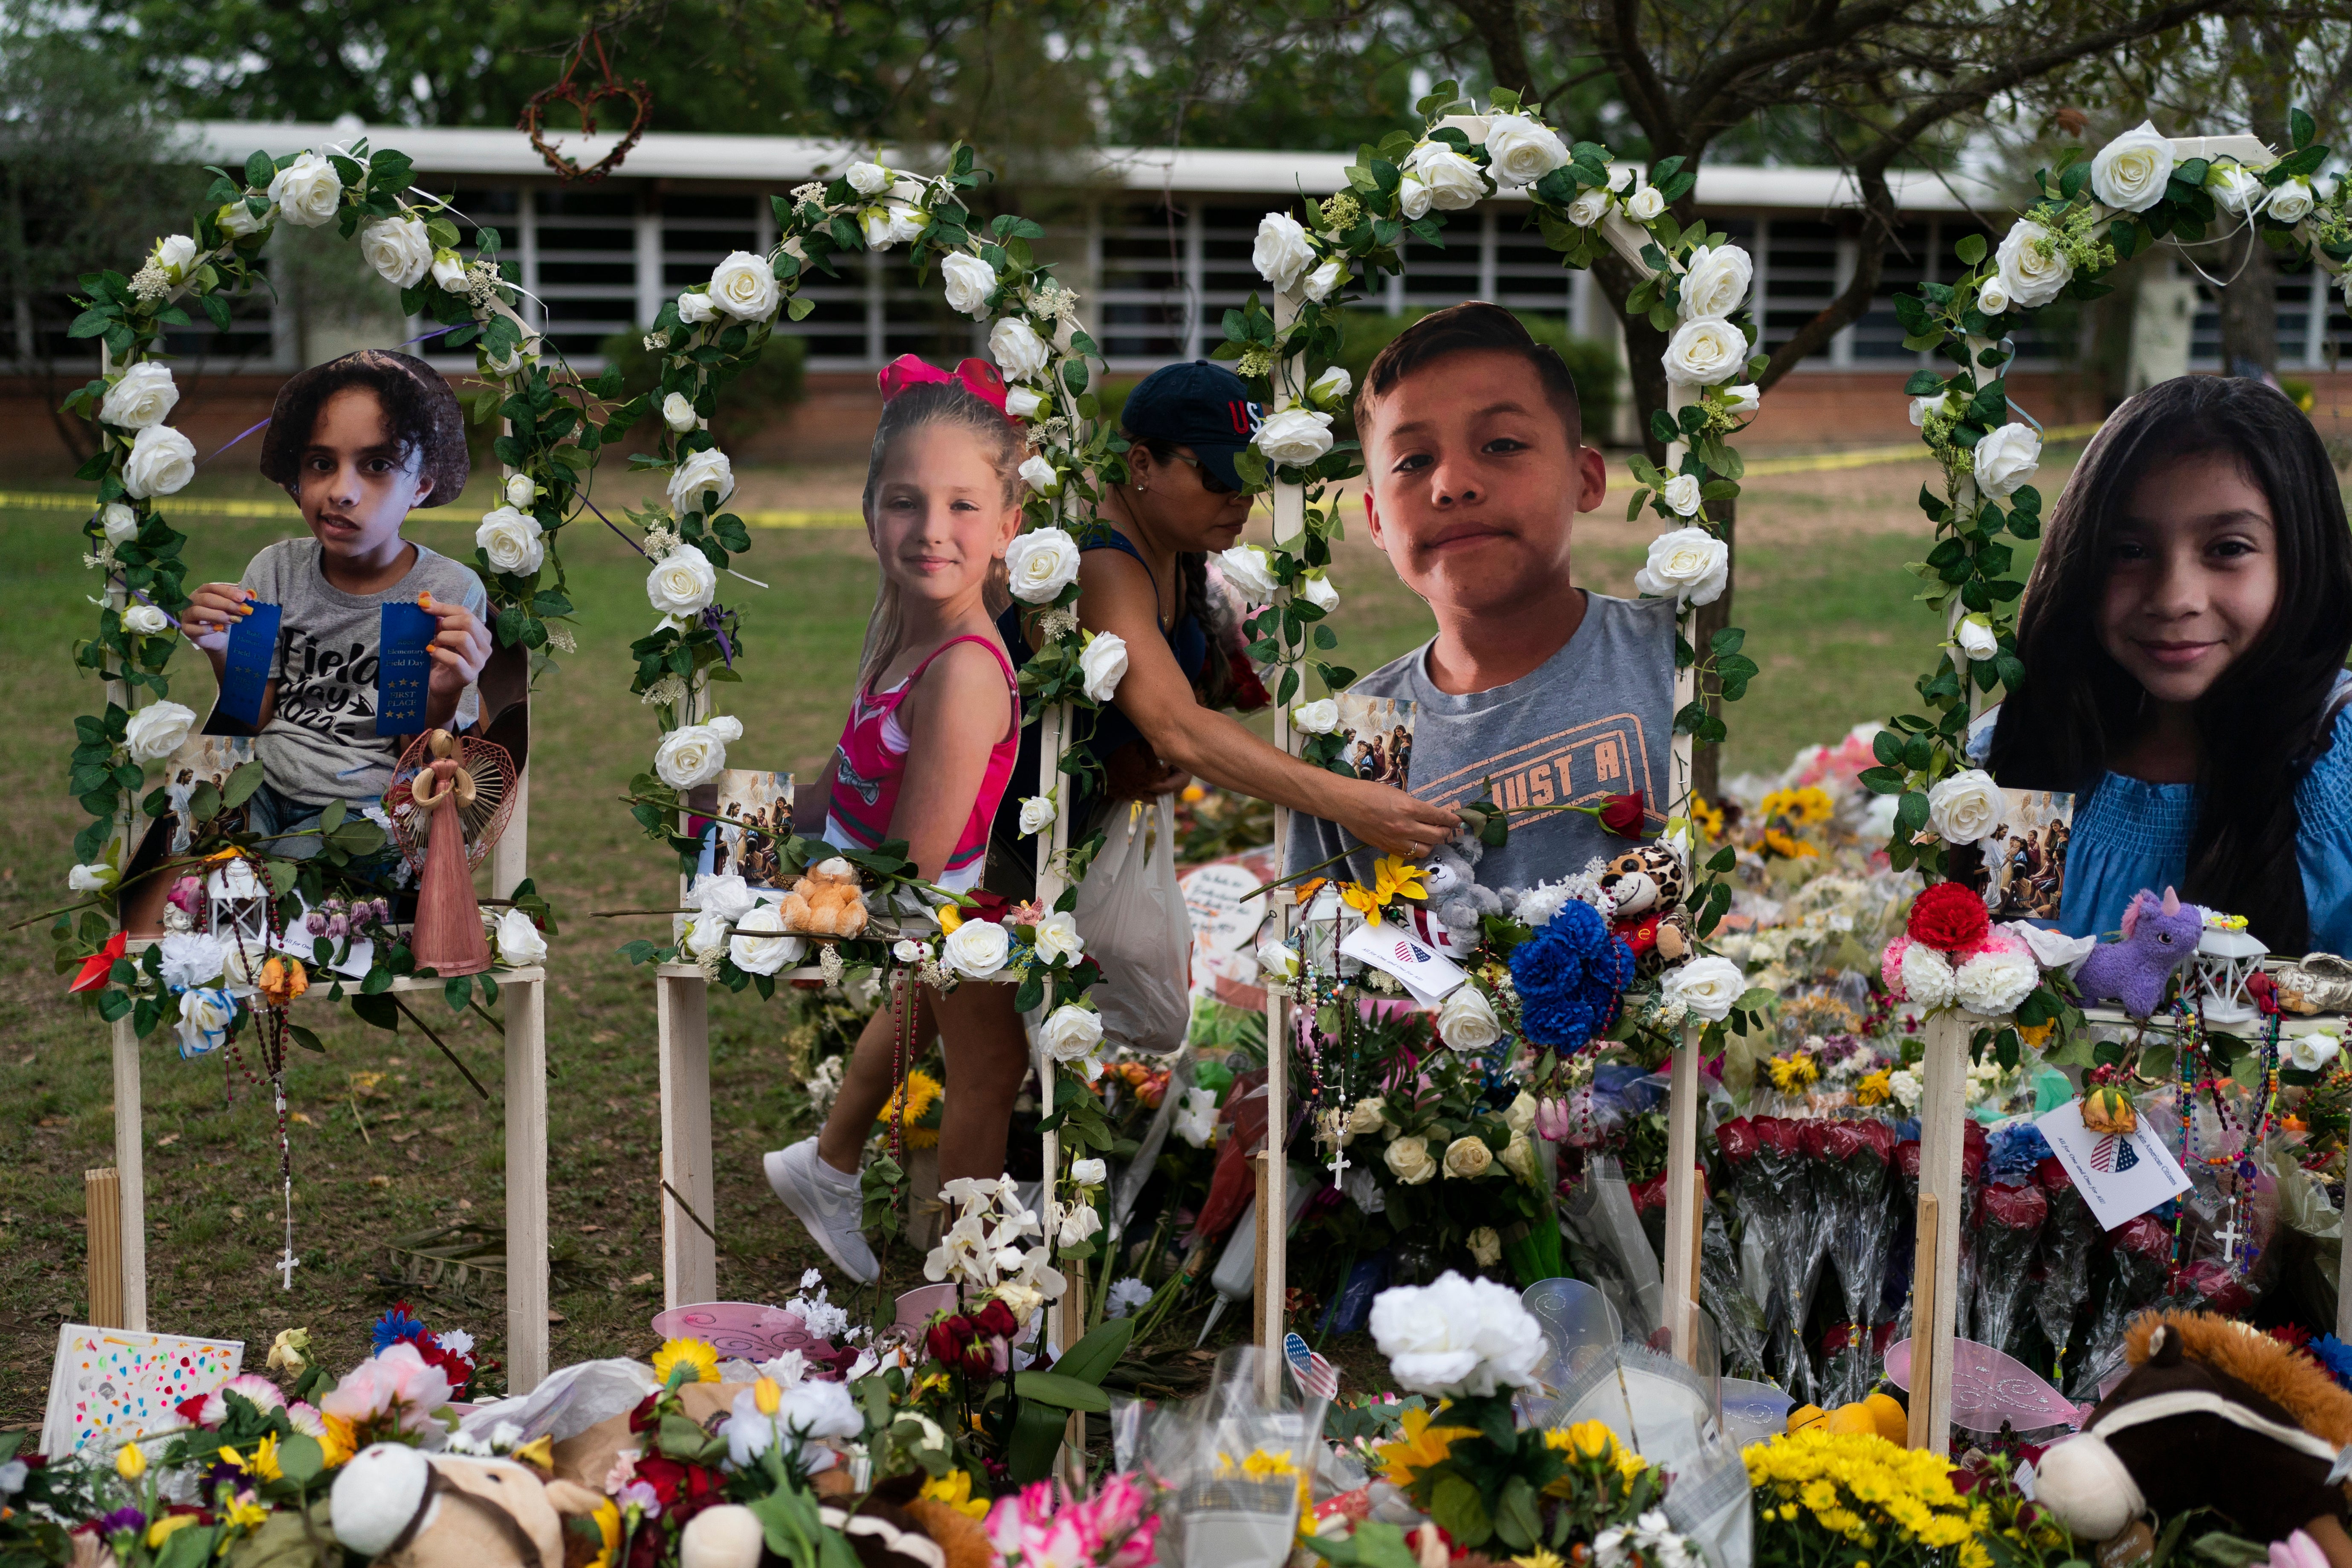 Cat Perez, 39, lays flowers at a memorial at Robb Elementary School in Uvalde, Texas Monday, May 30, 2022, to honor the victims killed in last week's school shooting. Photographs of the victims, from left, show Layla Salazar, McKenna